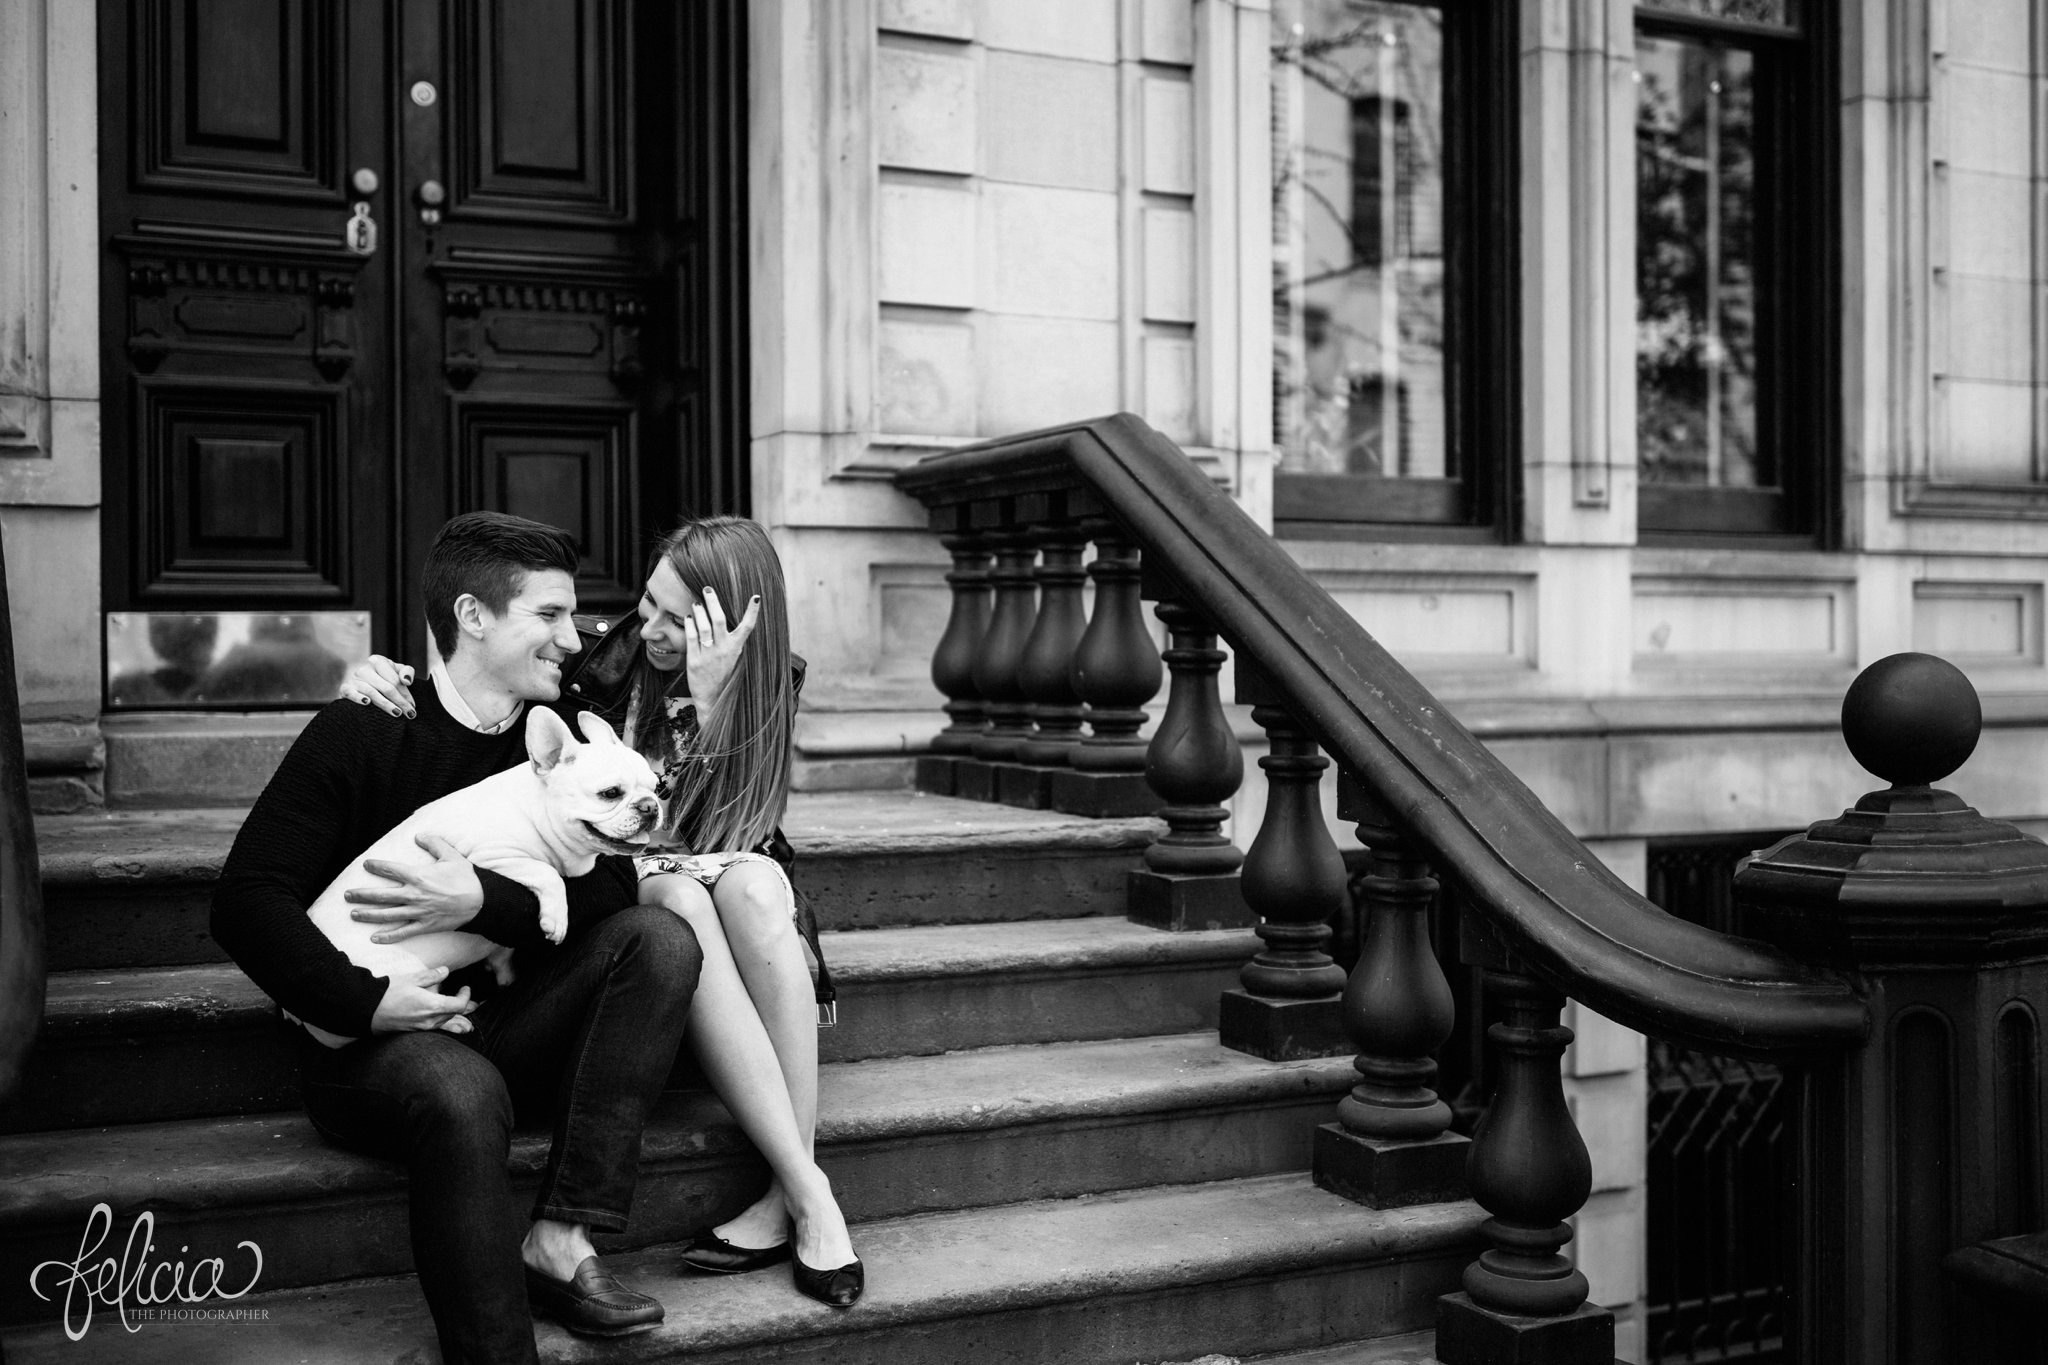 wedding | New York City | West Village | New York City photography | wedding photography | images by feliciathephotographer.com | engagement photos | engagement pictures in New York City | laughing bride and groom | black and white | stairwell photography | brickstone 